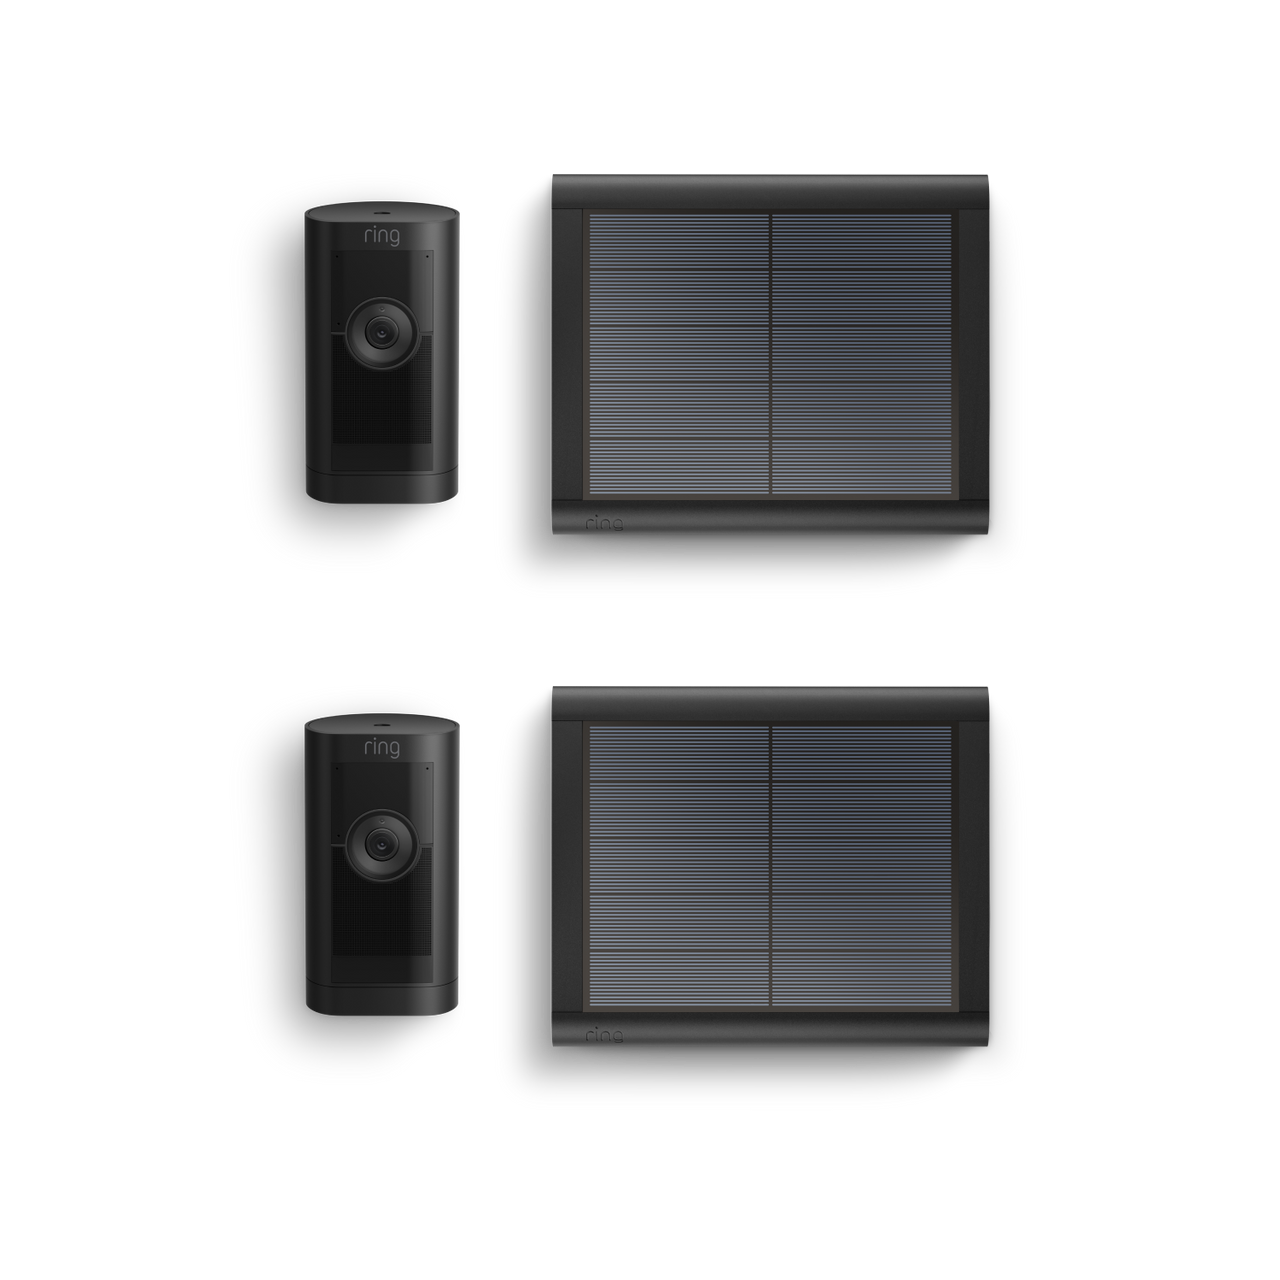 files/ring_stick-up-cam-pro-solar_blk_2pk_01_product_angle_wall_1500x1500_a989f0a5-4e31-45d4-9d25-779cd5240676.png